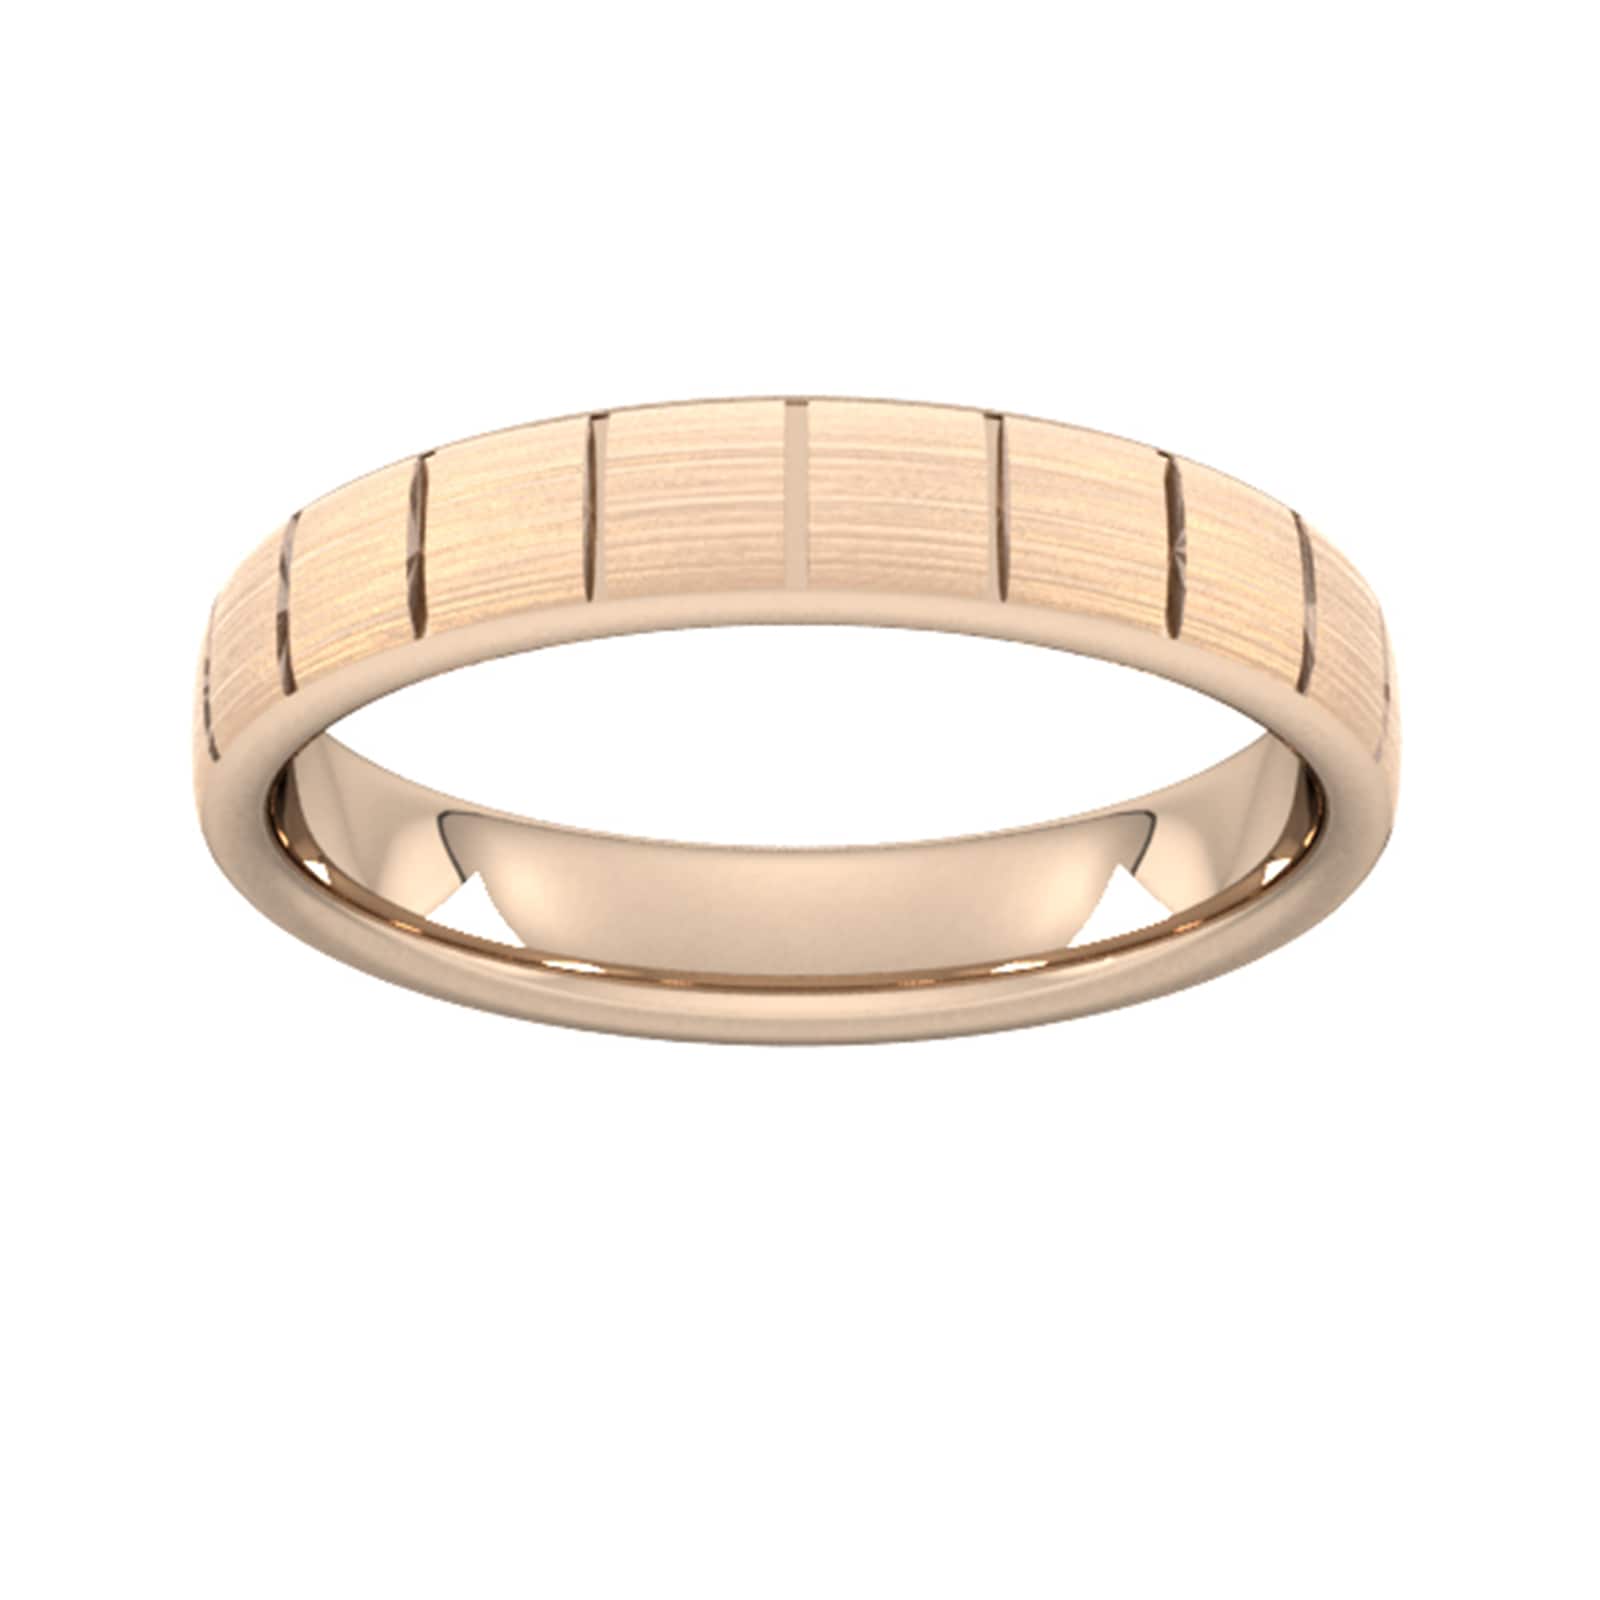 4mm D Shape Heavy Vertical Lines Wedding Ring In 9 Carat Rose Gold - Ring Size U